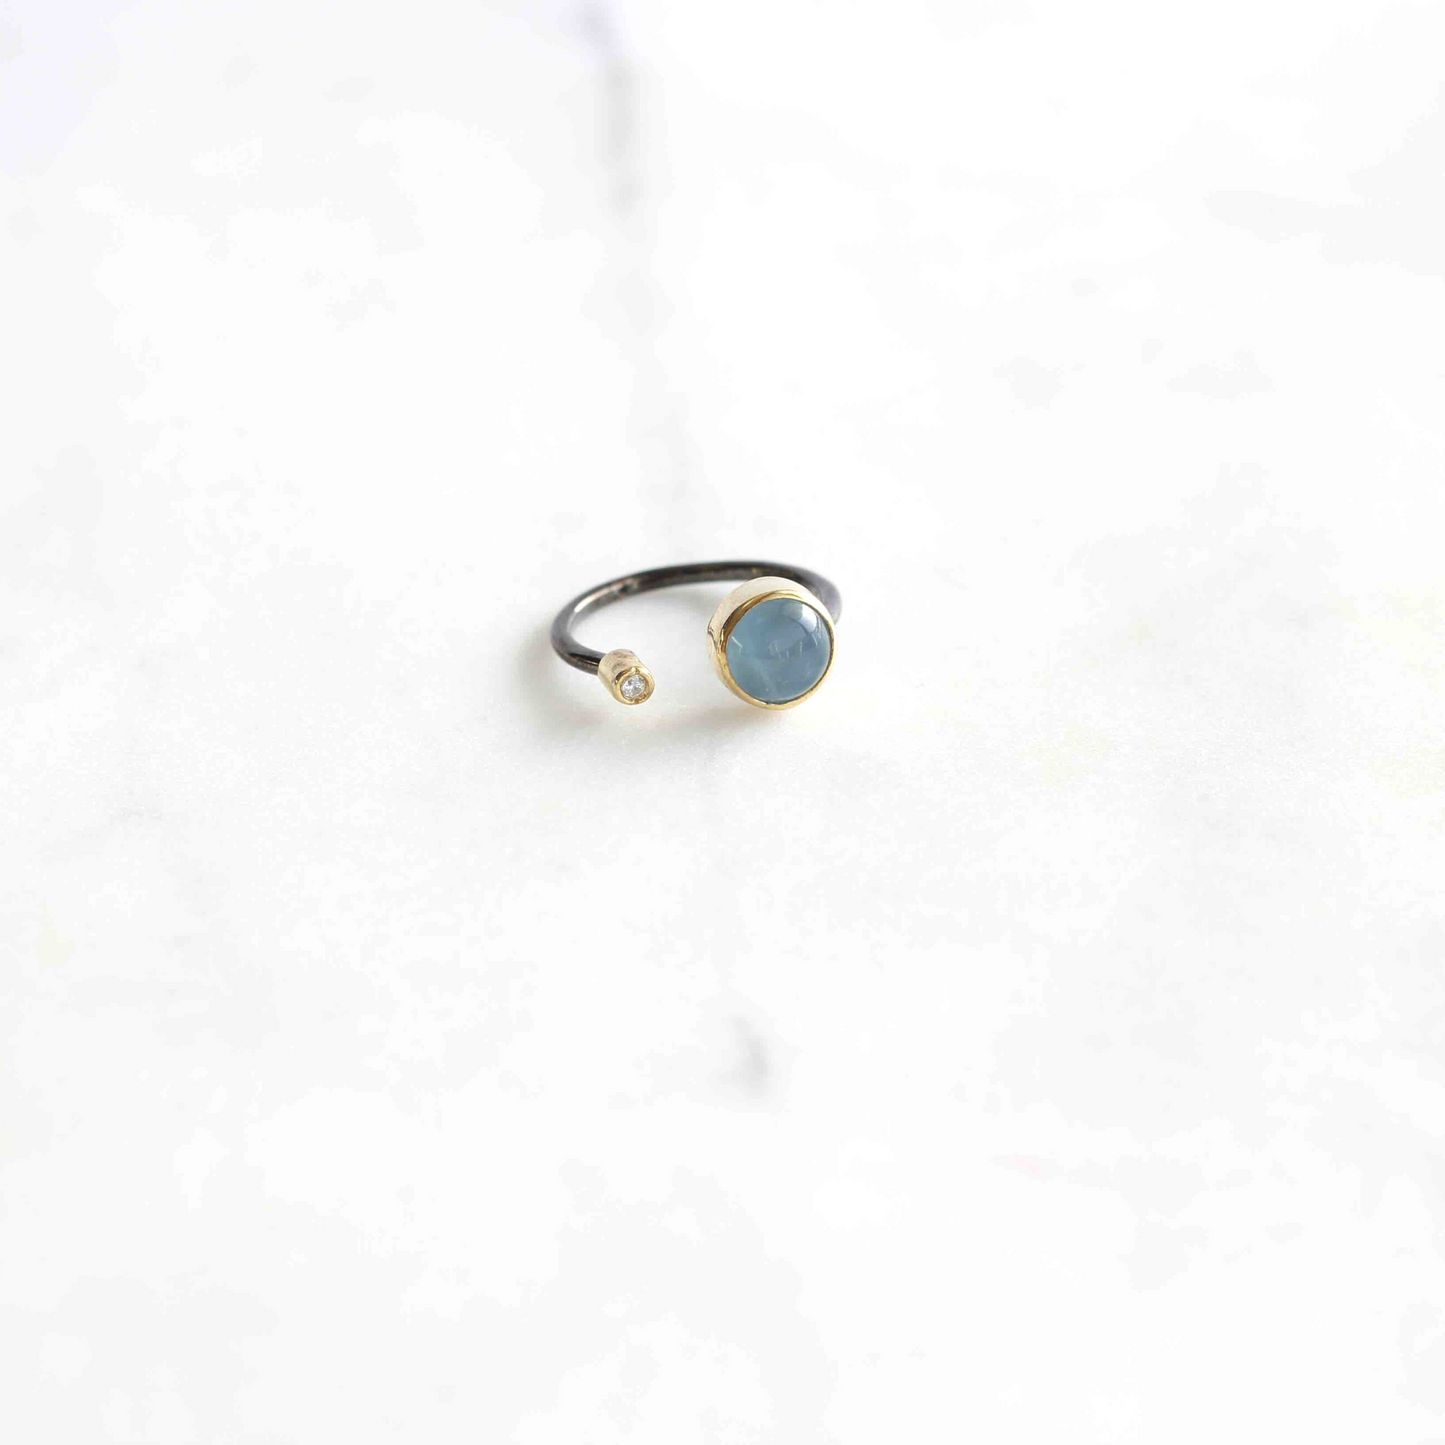 Minimal natural Aquamarine beaded Sterling Silver Gemstone Rings white zircon on side, and they are adjustable from the bottom.